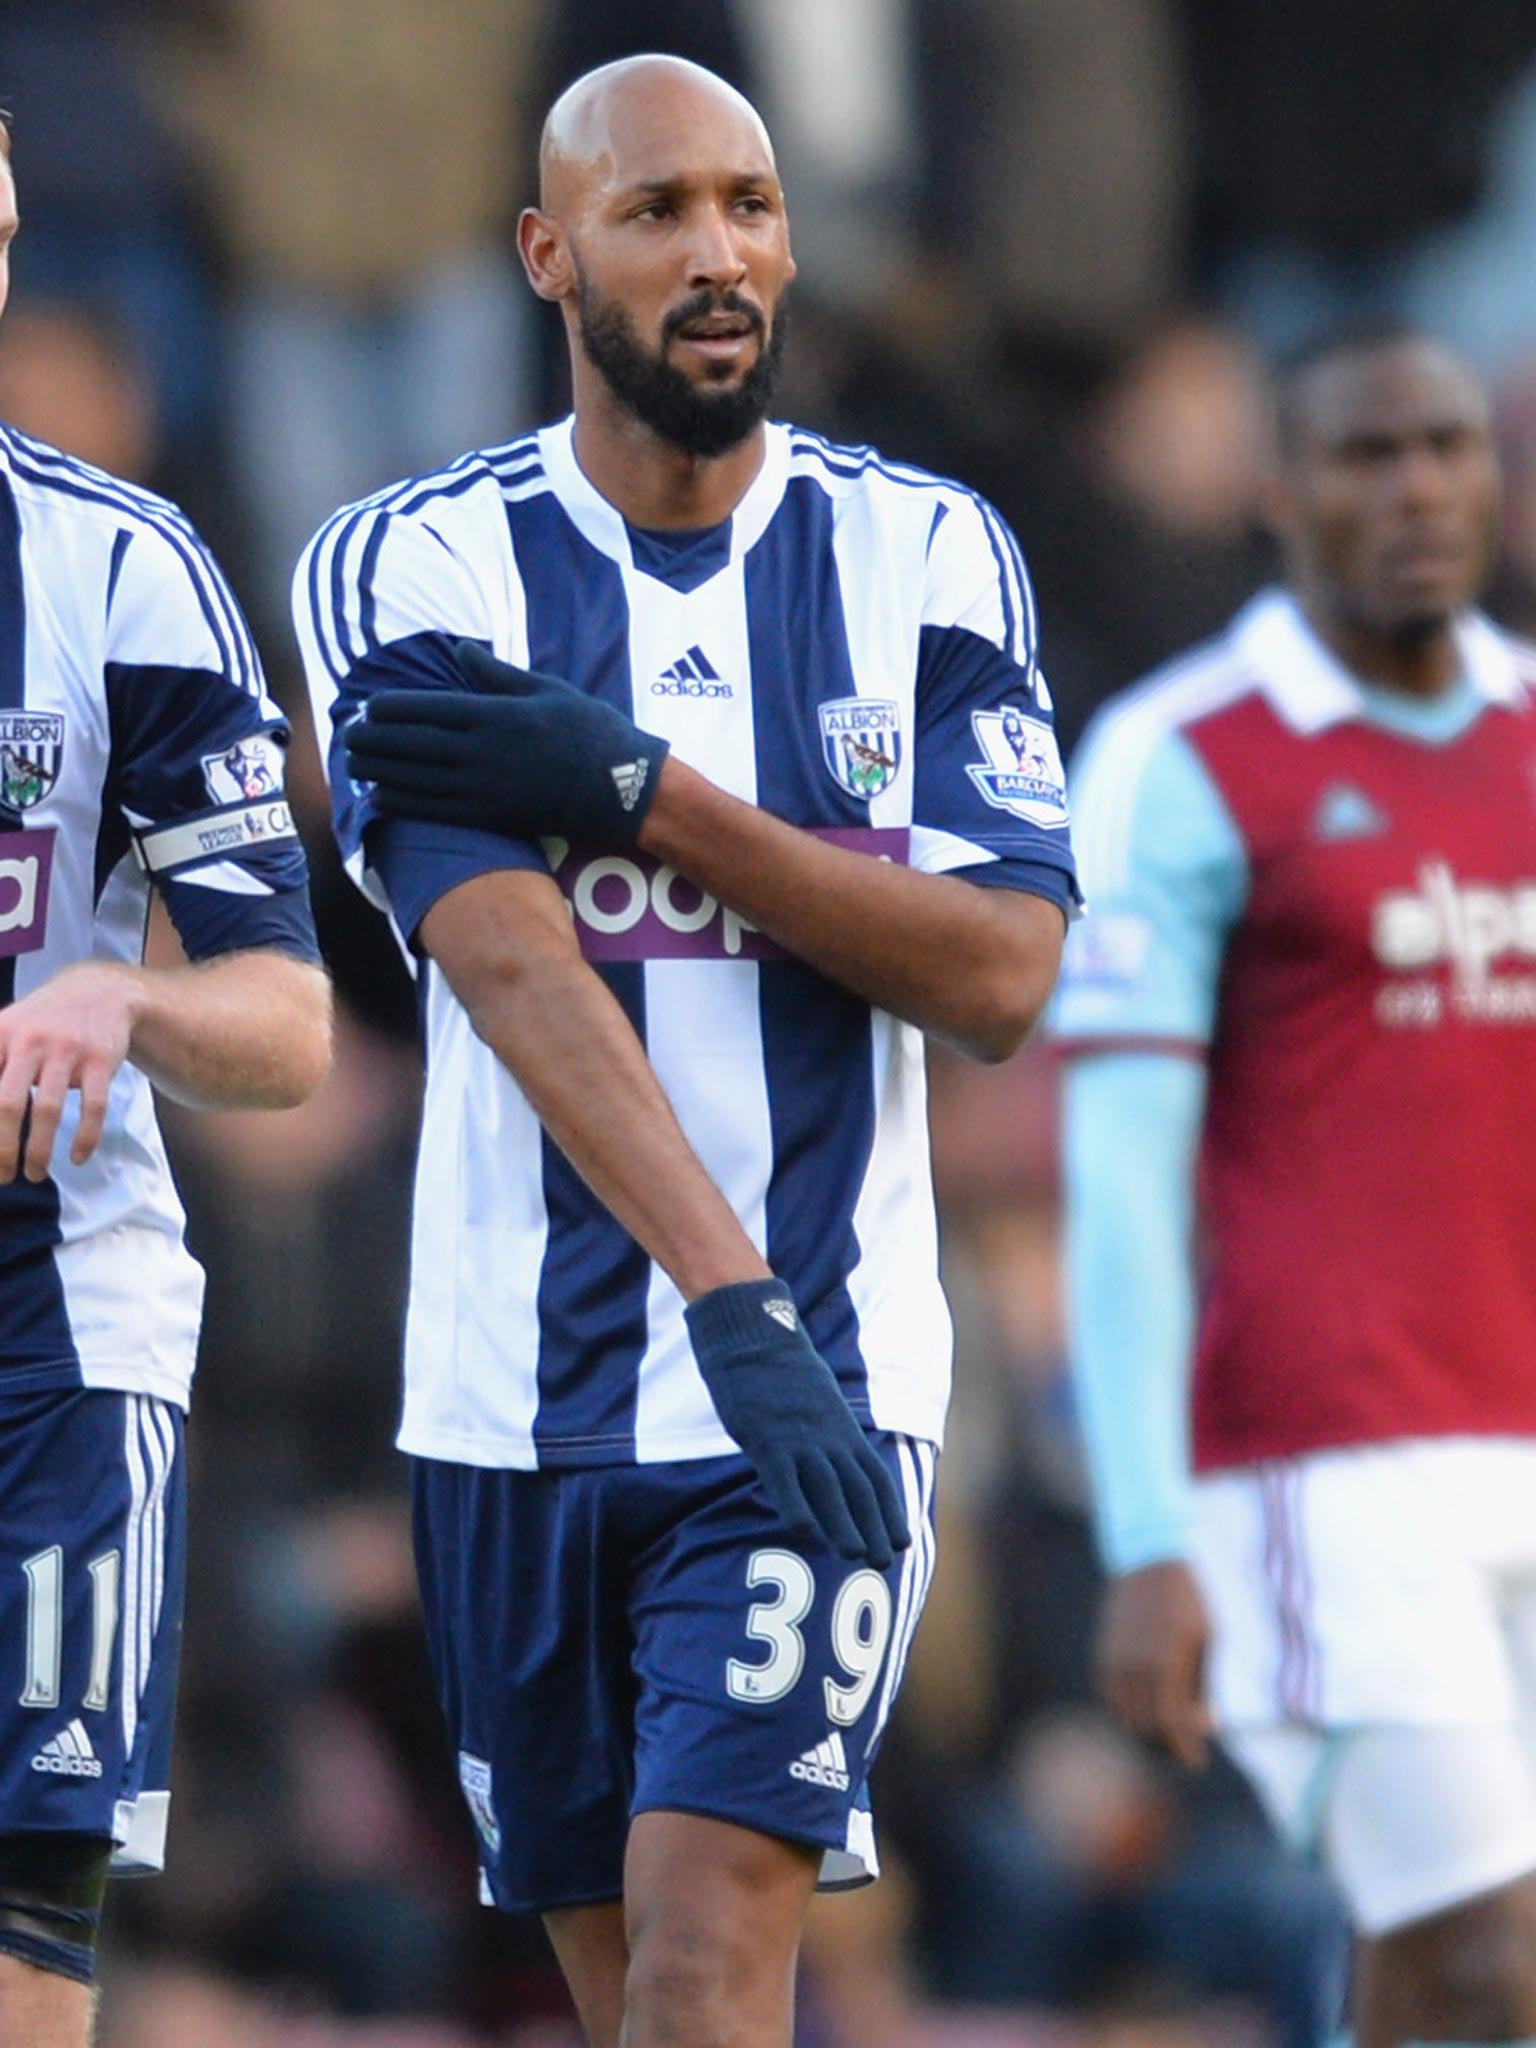 Nicolas Anelka’s “quenelle” gesture in the game against West Ham